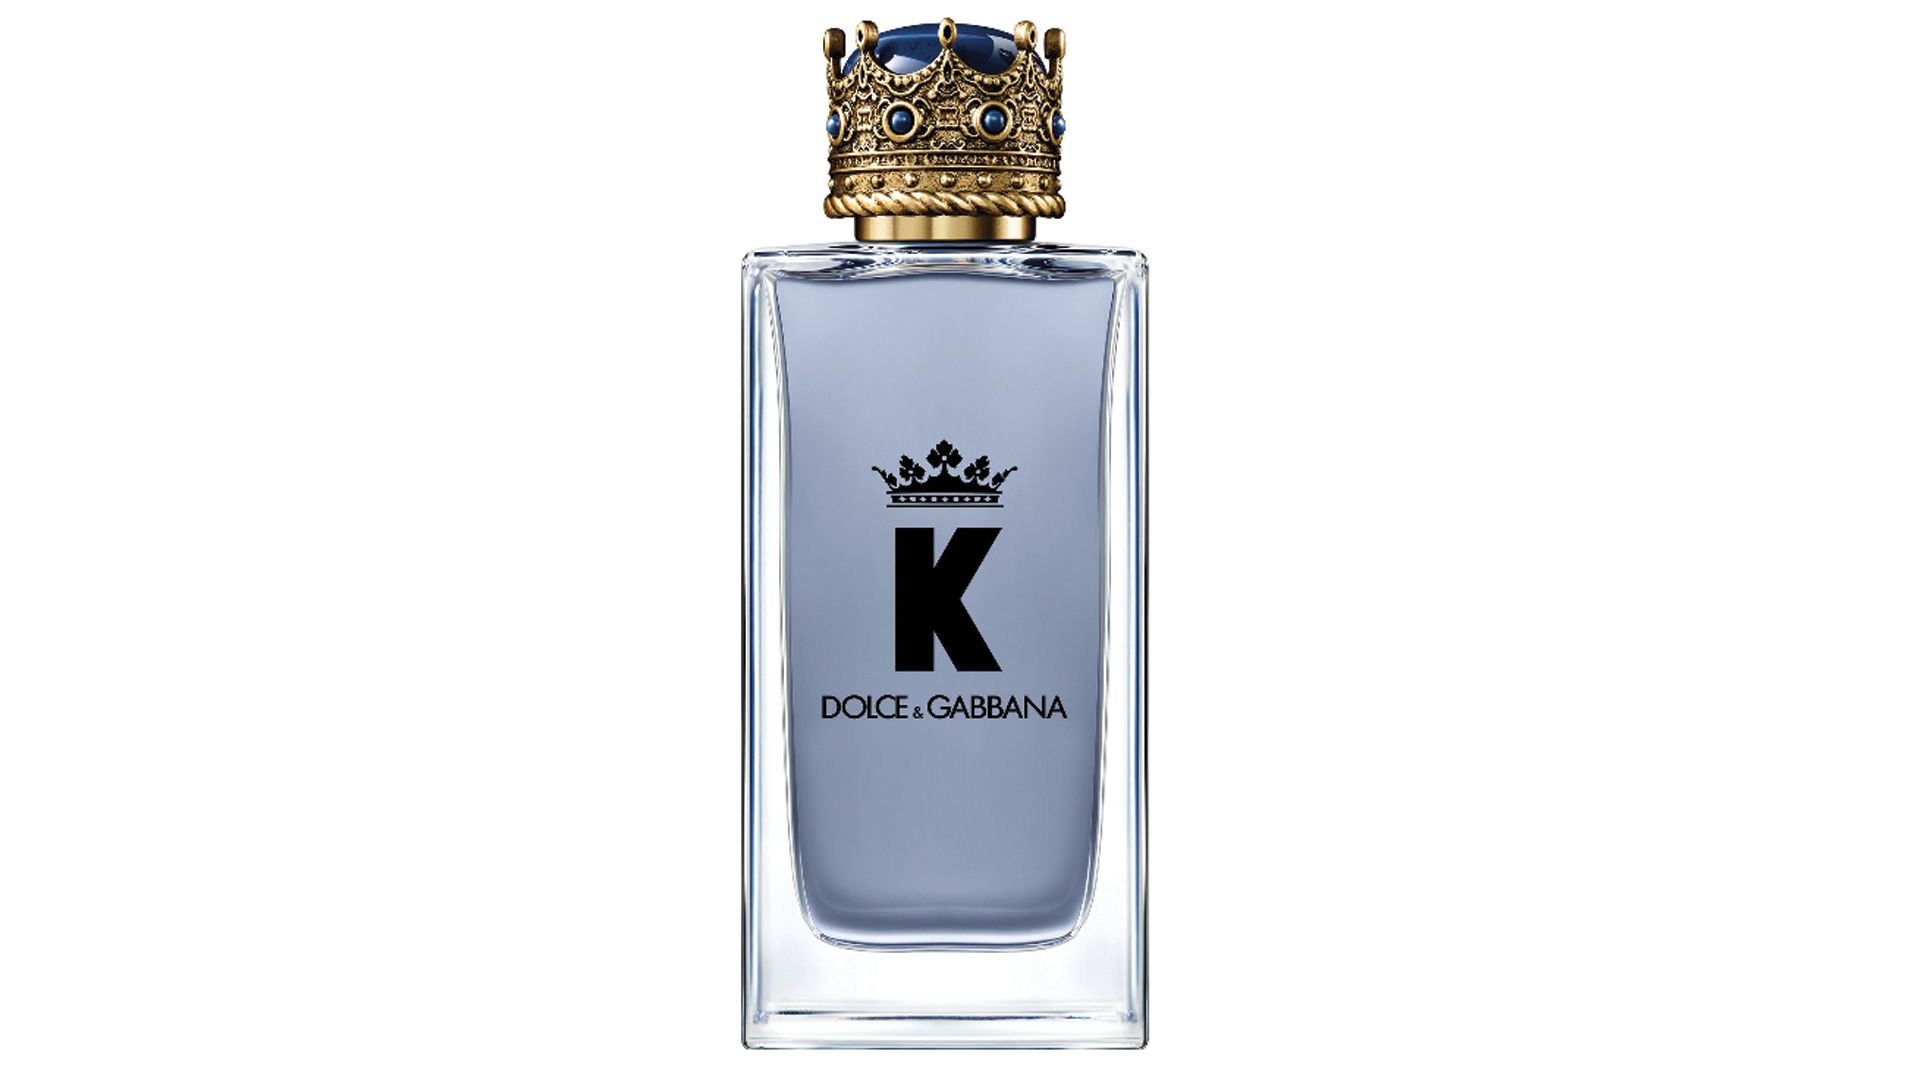 Watch Codes to Live By: K by Dolce&Gabbana | Codes to Live By | GQ